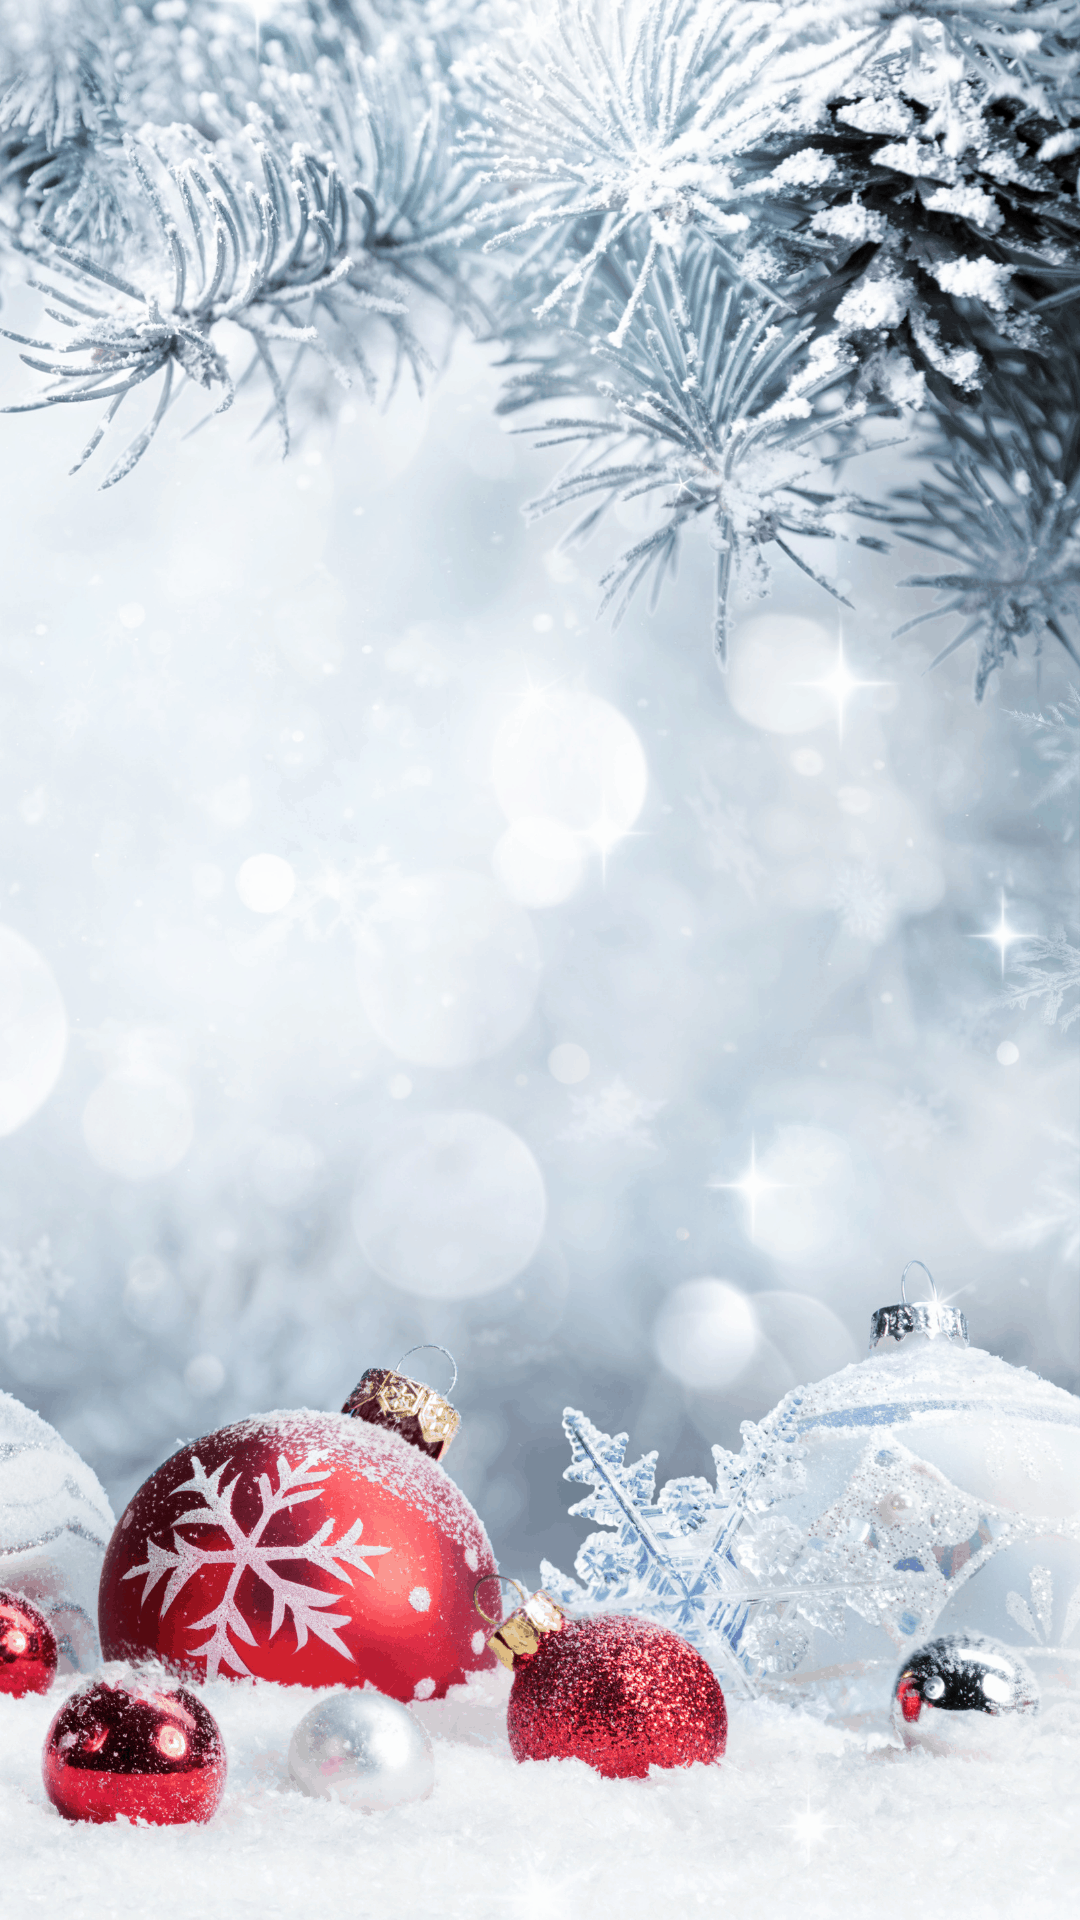 A christmas scene with ornaments and snow - Christmas